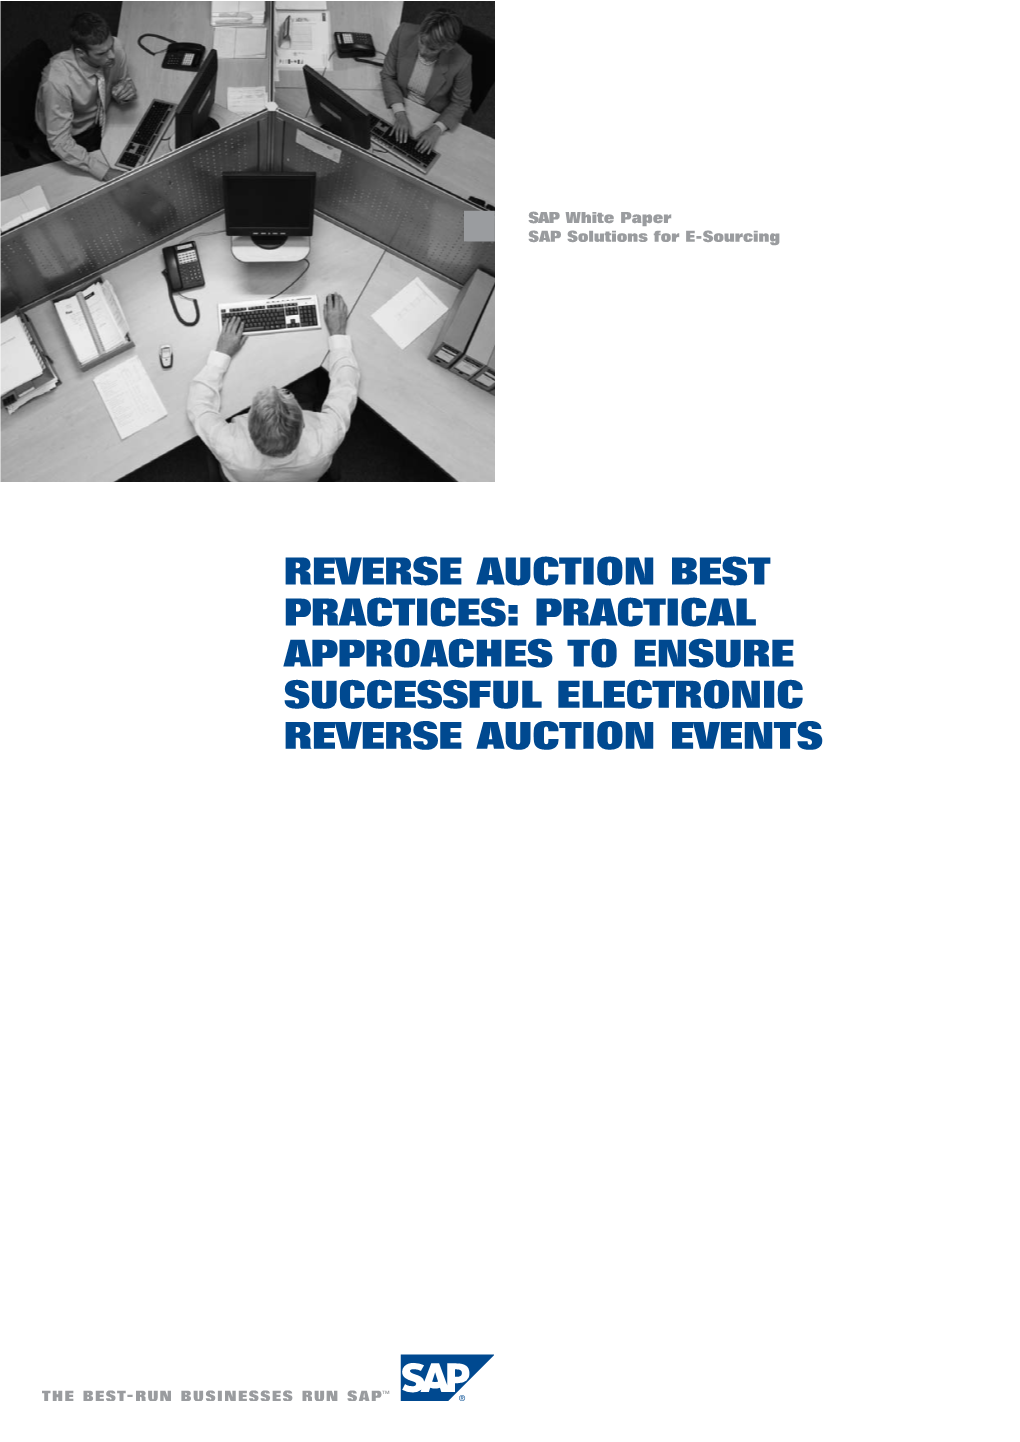 REVERSE AUCTION BEST PRACTICES: PRACTICAL APPROACHES to ENSURE SUCCESSFUL ELECTRONIC REVERSE AUCTION EVENTS © Copyright 2006 SAP AG